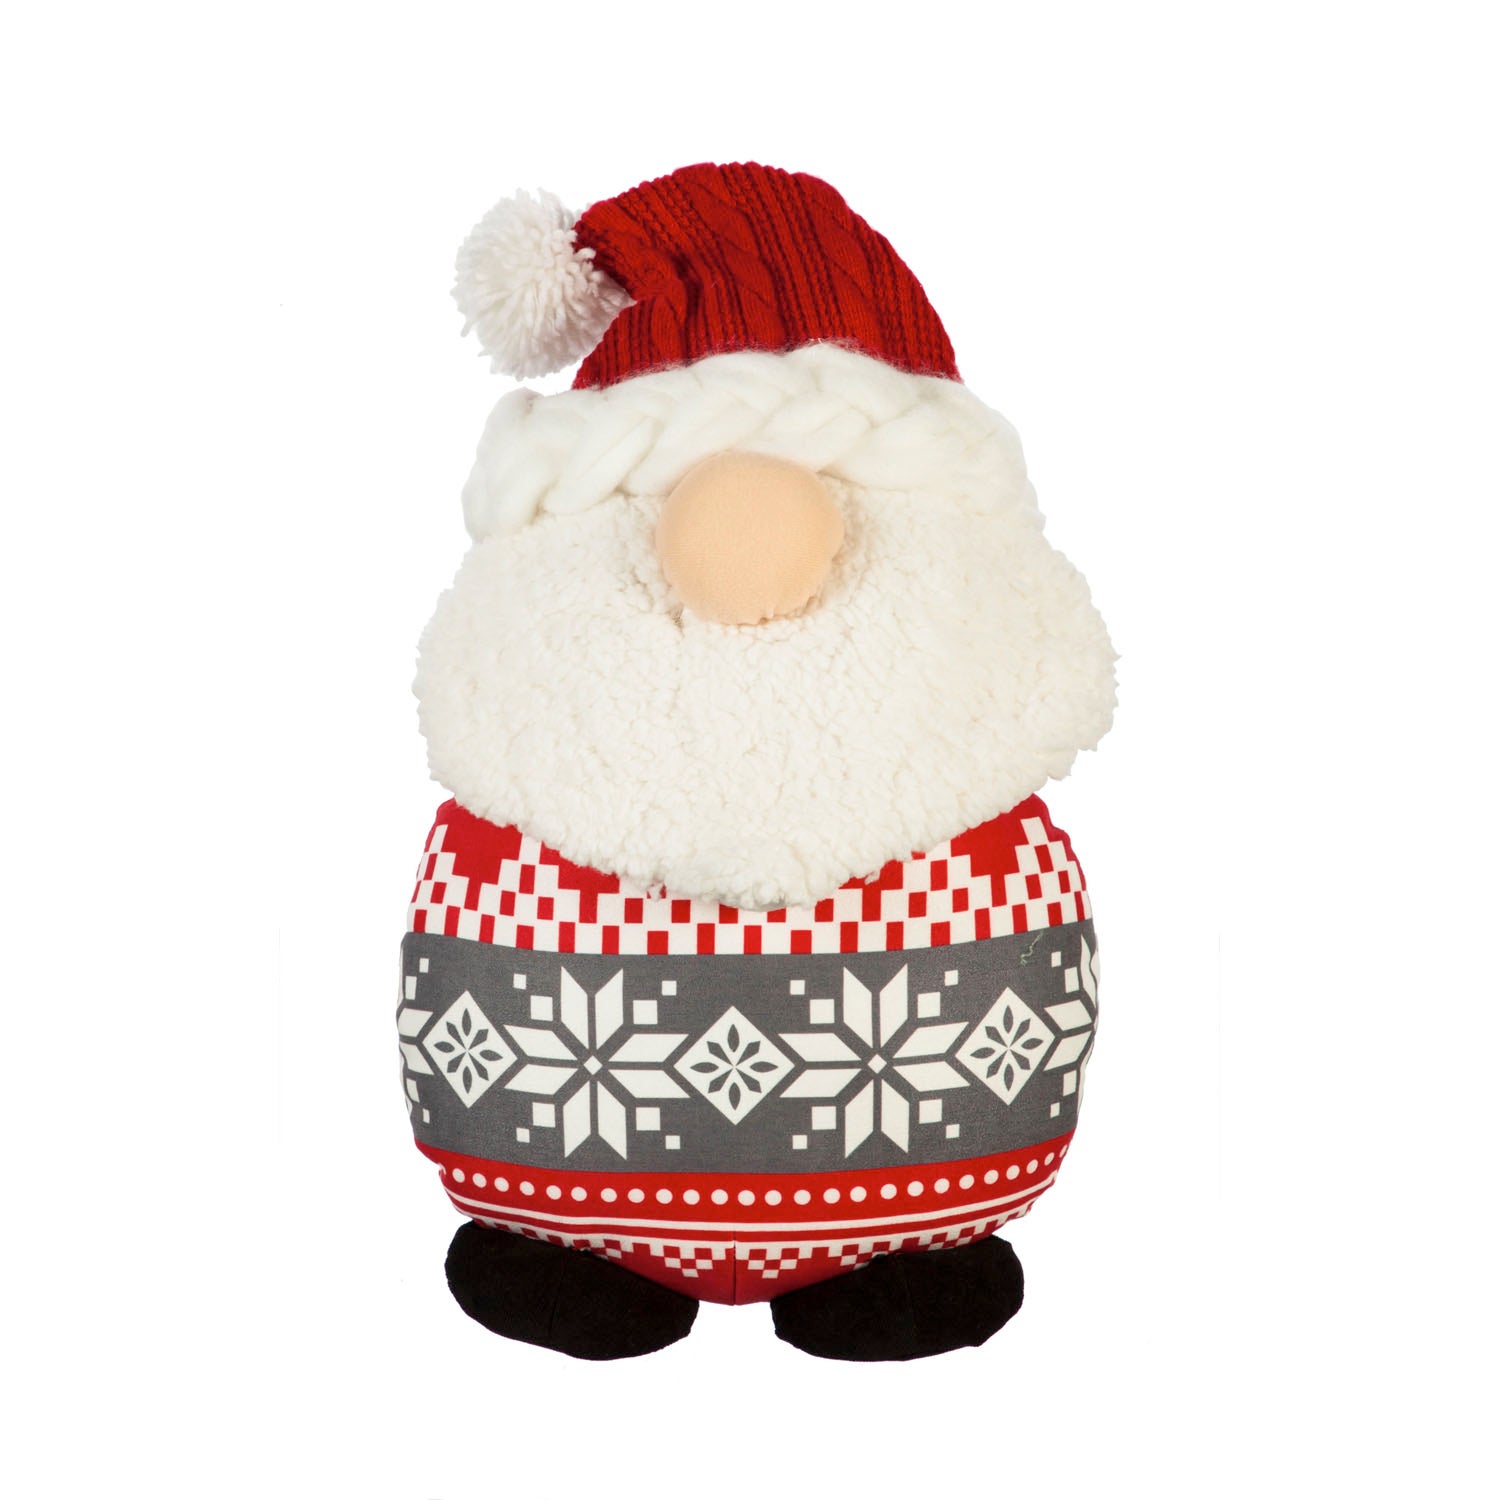 Gnome Shaped Pillow with Snowflake Sweater